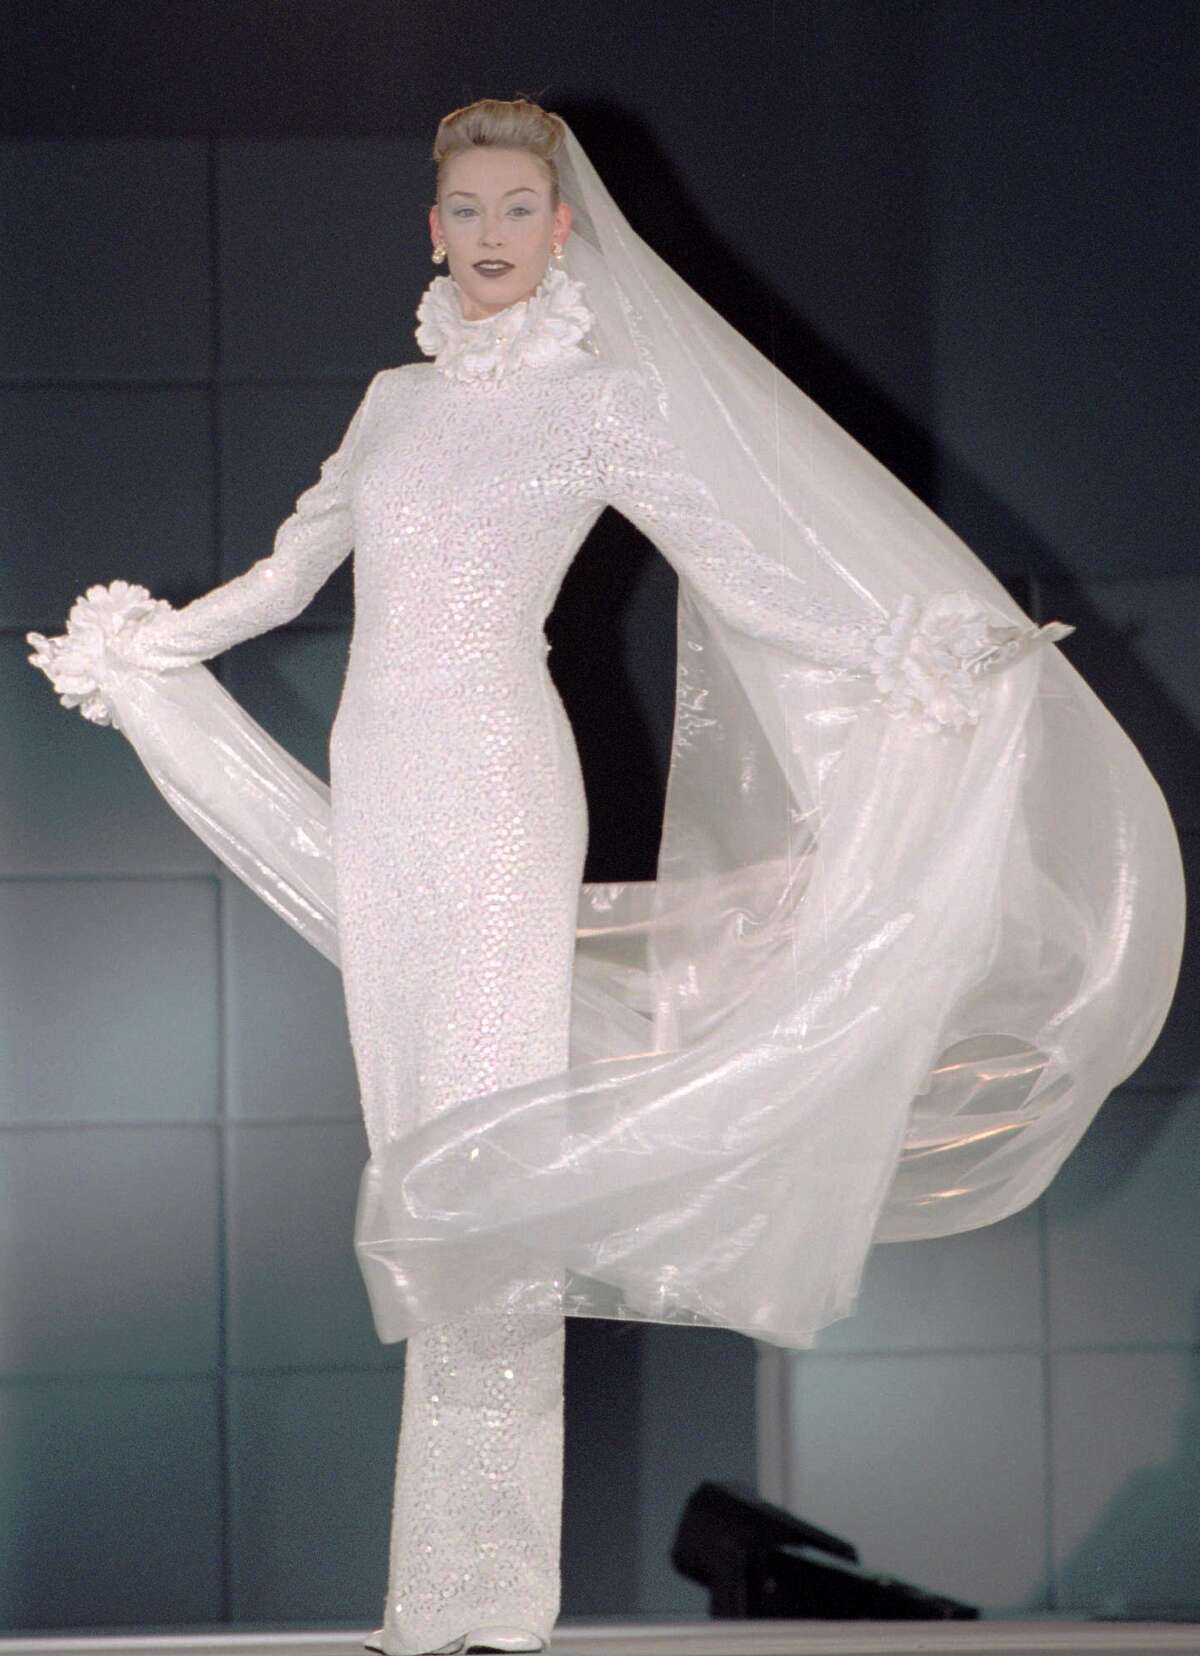 Wedding dresses to avoid at all costs